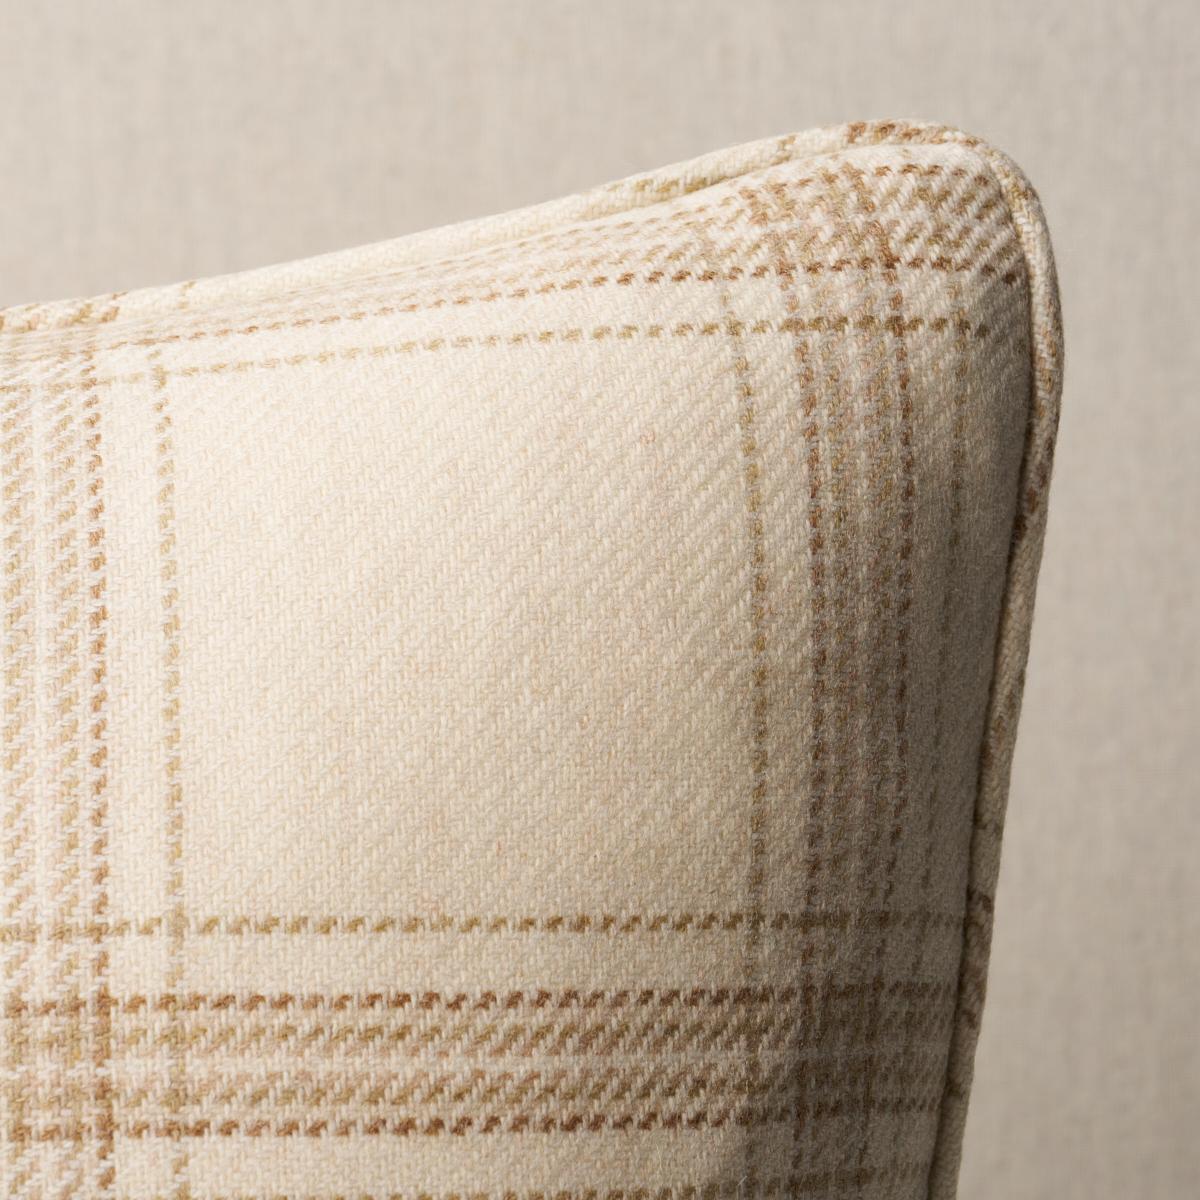 This pillow features Blackburn Merino Wool with a self welt finish. Blackburn Merino Plaid in ivory is a traditional twill weave made of superfine lambswool yarns that are mélange spun for a wonderful heathered effect. Pillow includes a feather/down